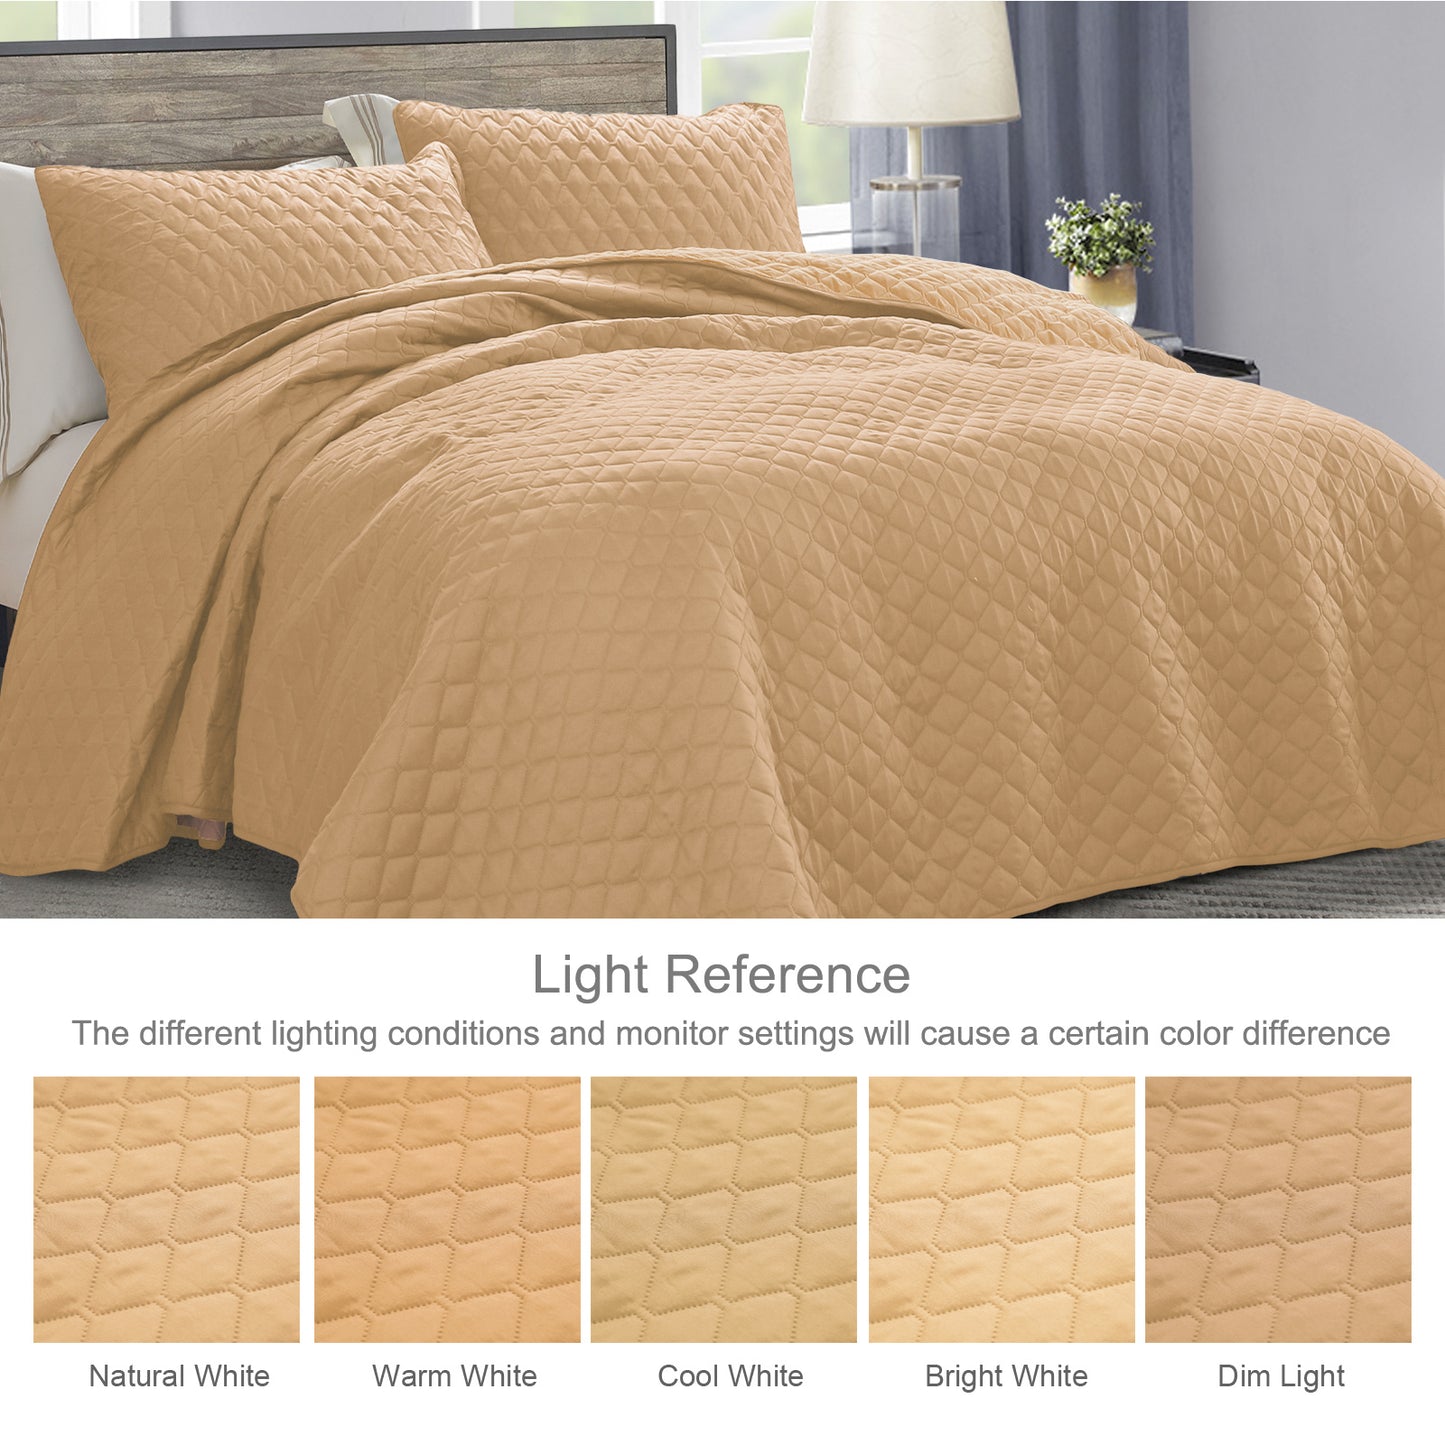 Exclusivo Mezcla California King Quilt Bedding Set with Pillow Shams, Lightweight Quilts Cal Oversized King Size, Soft Bedspreads Bed Coverlets for All Seasons - (Camel, 112"x104")